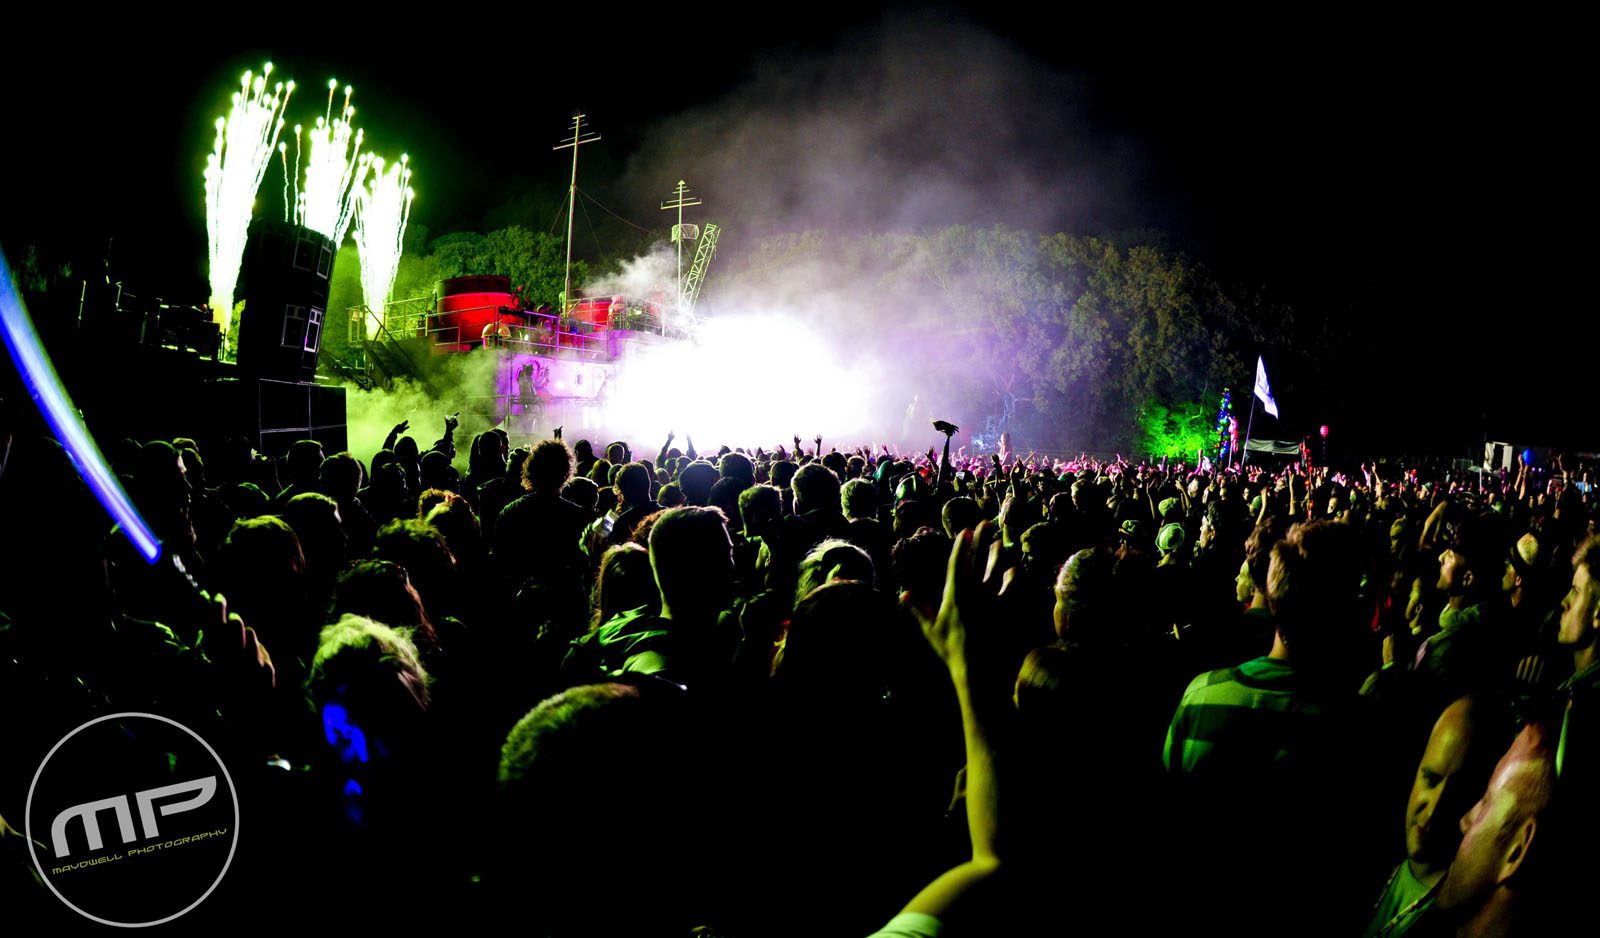 H.M.S. Bestival At Night 2013